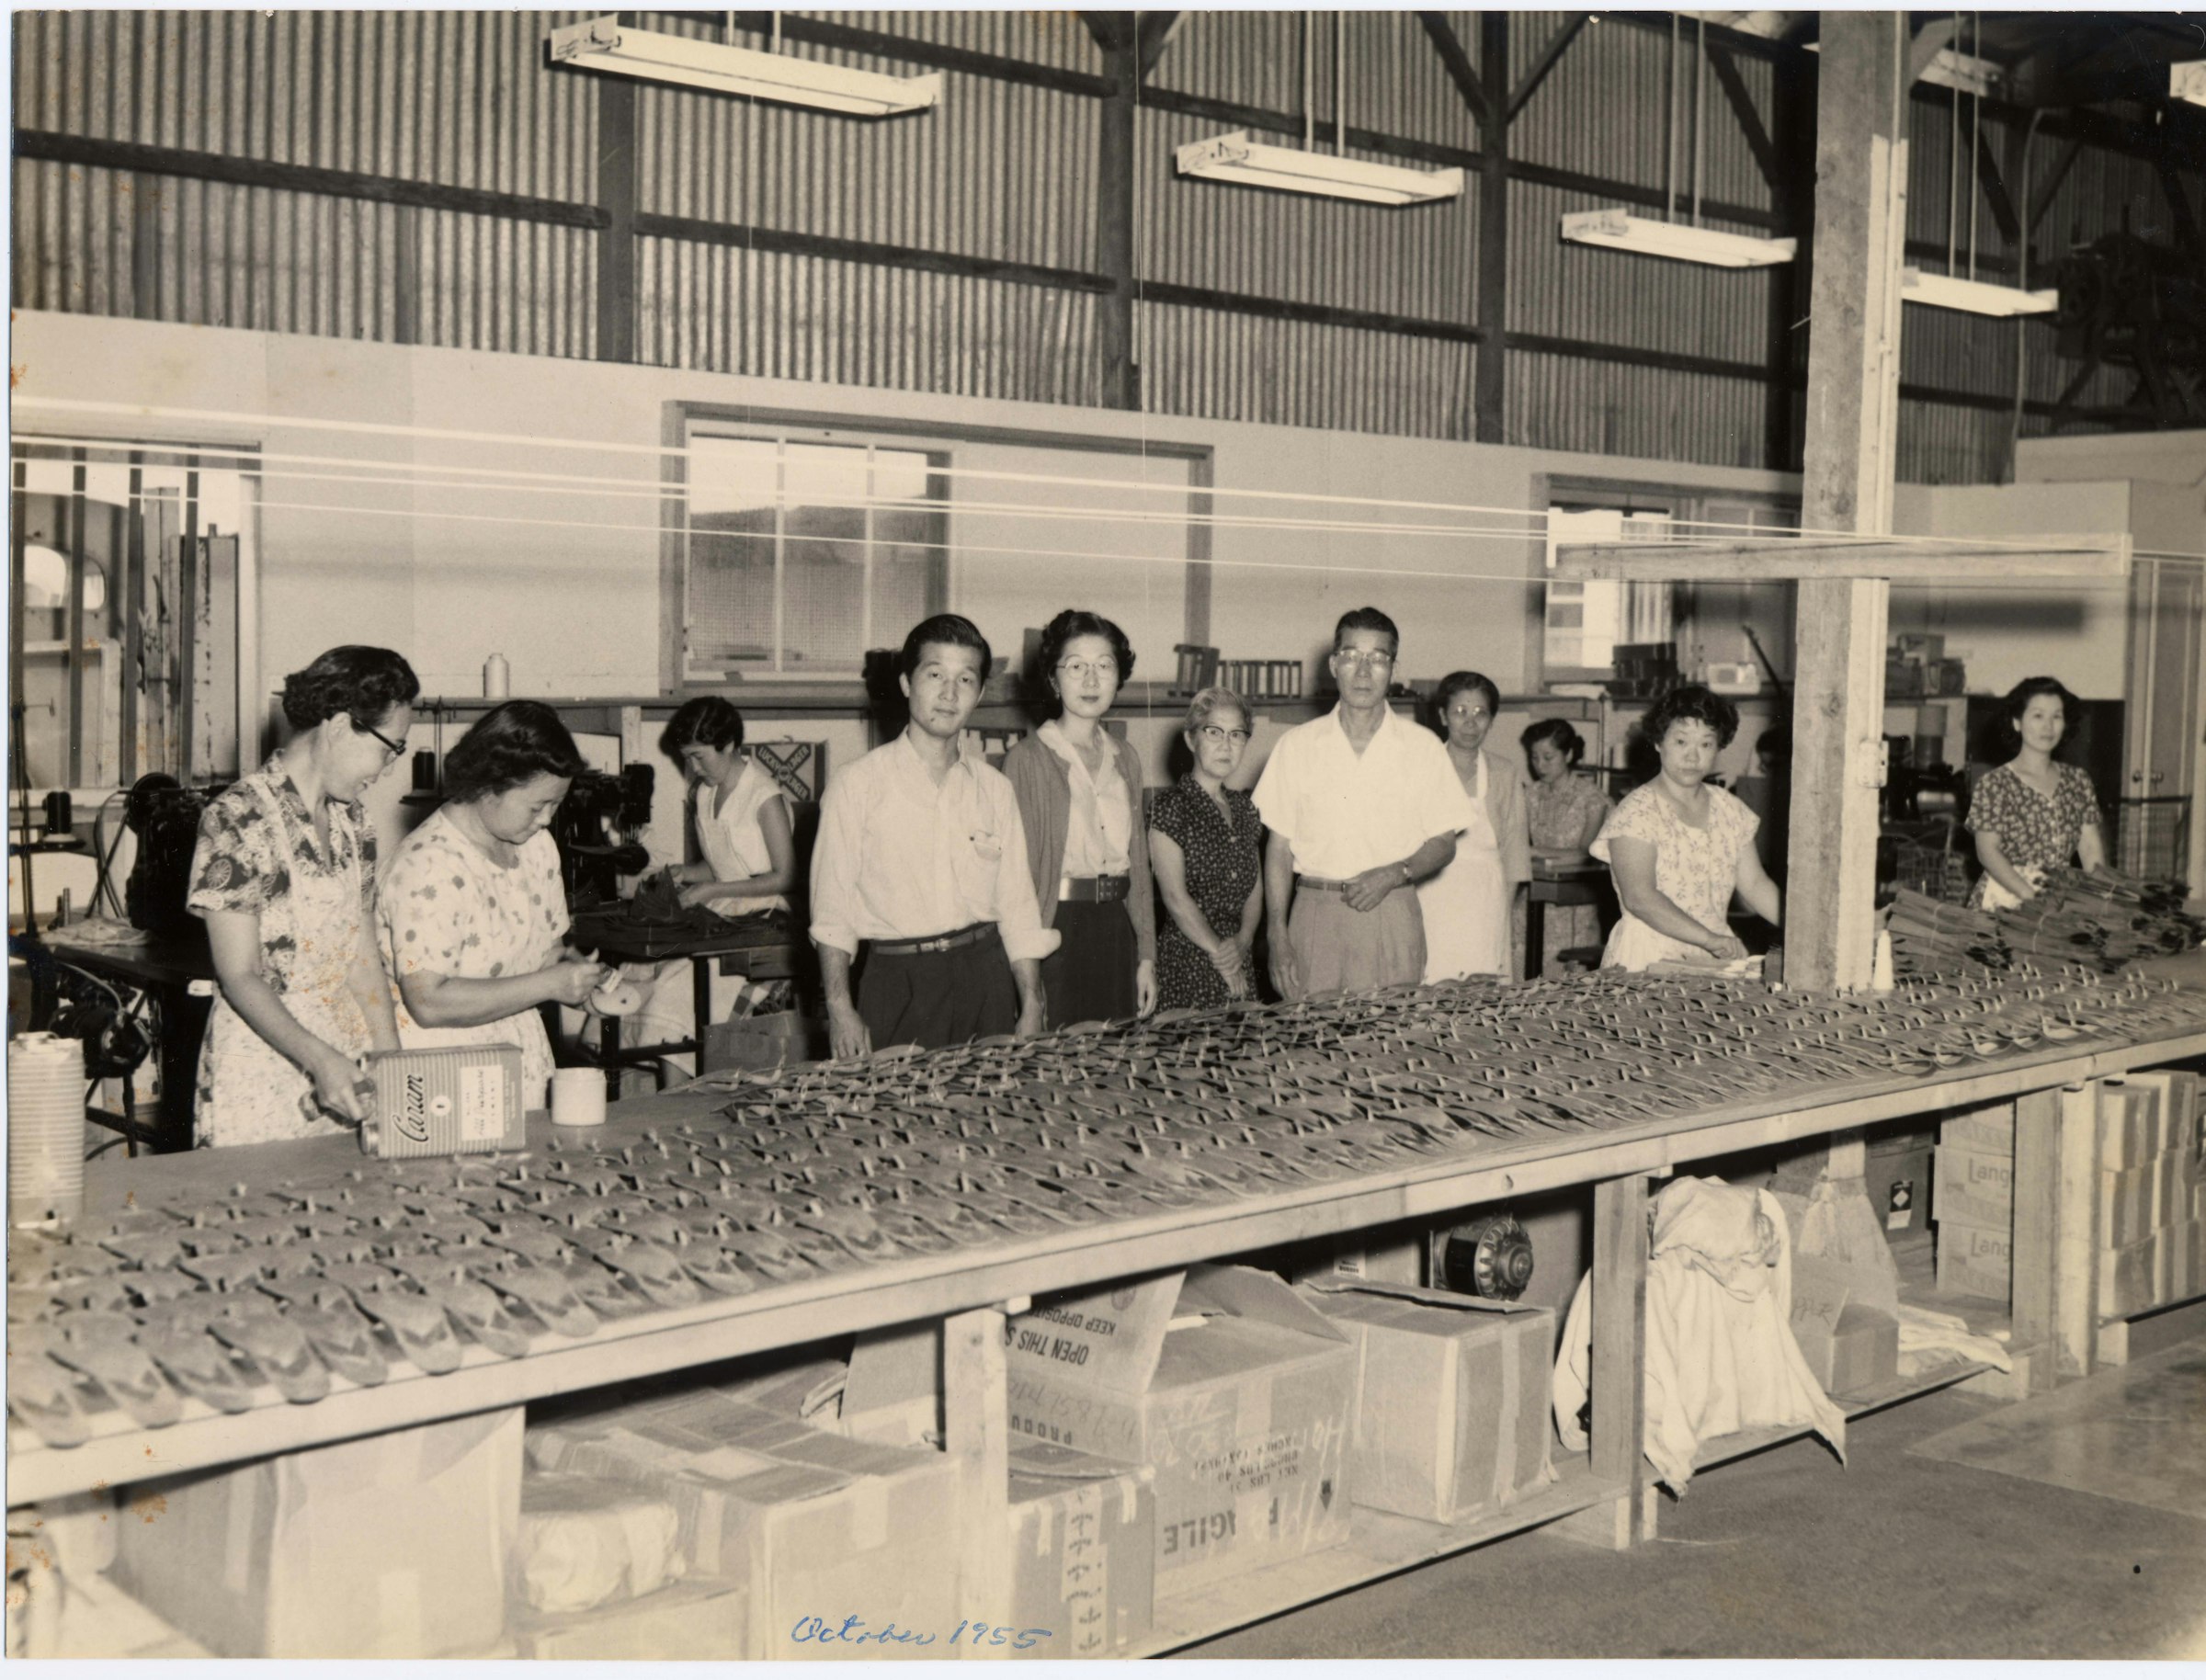 Staff at the factory during the early days of the brand. Motonaga can be seen in the middle.